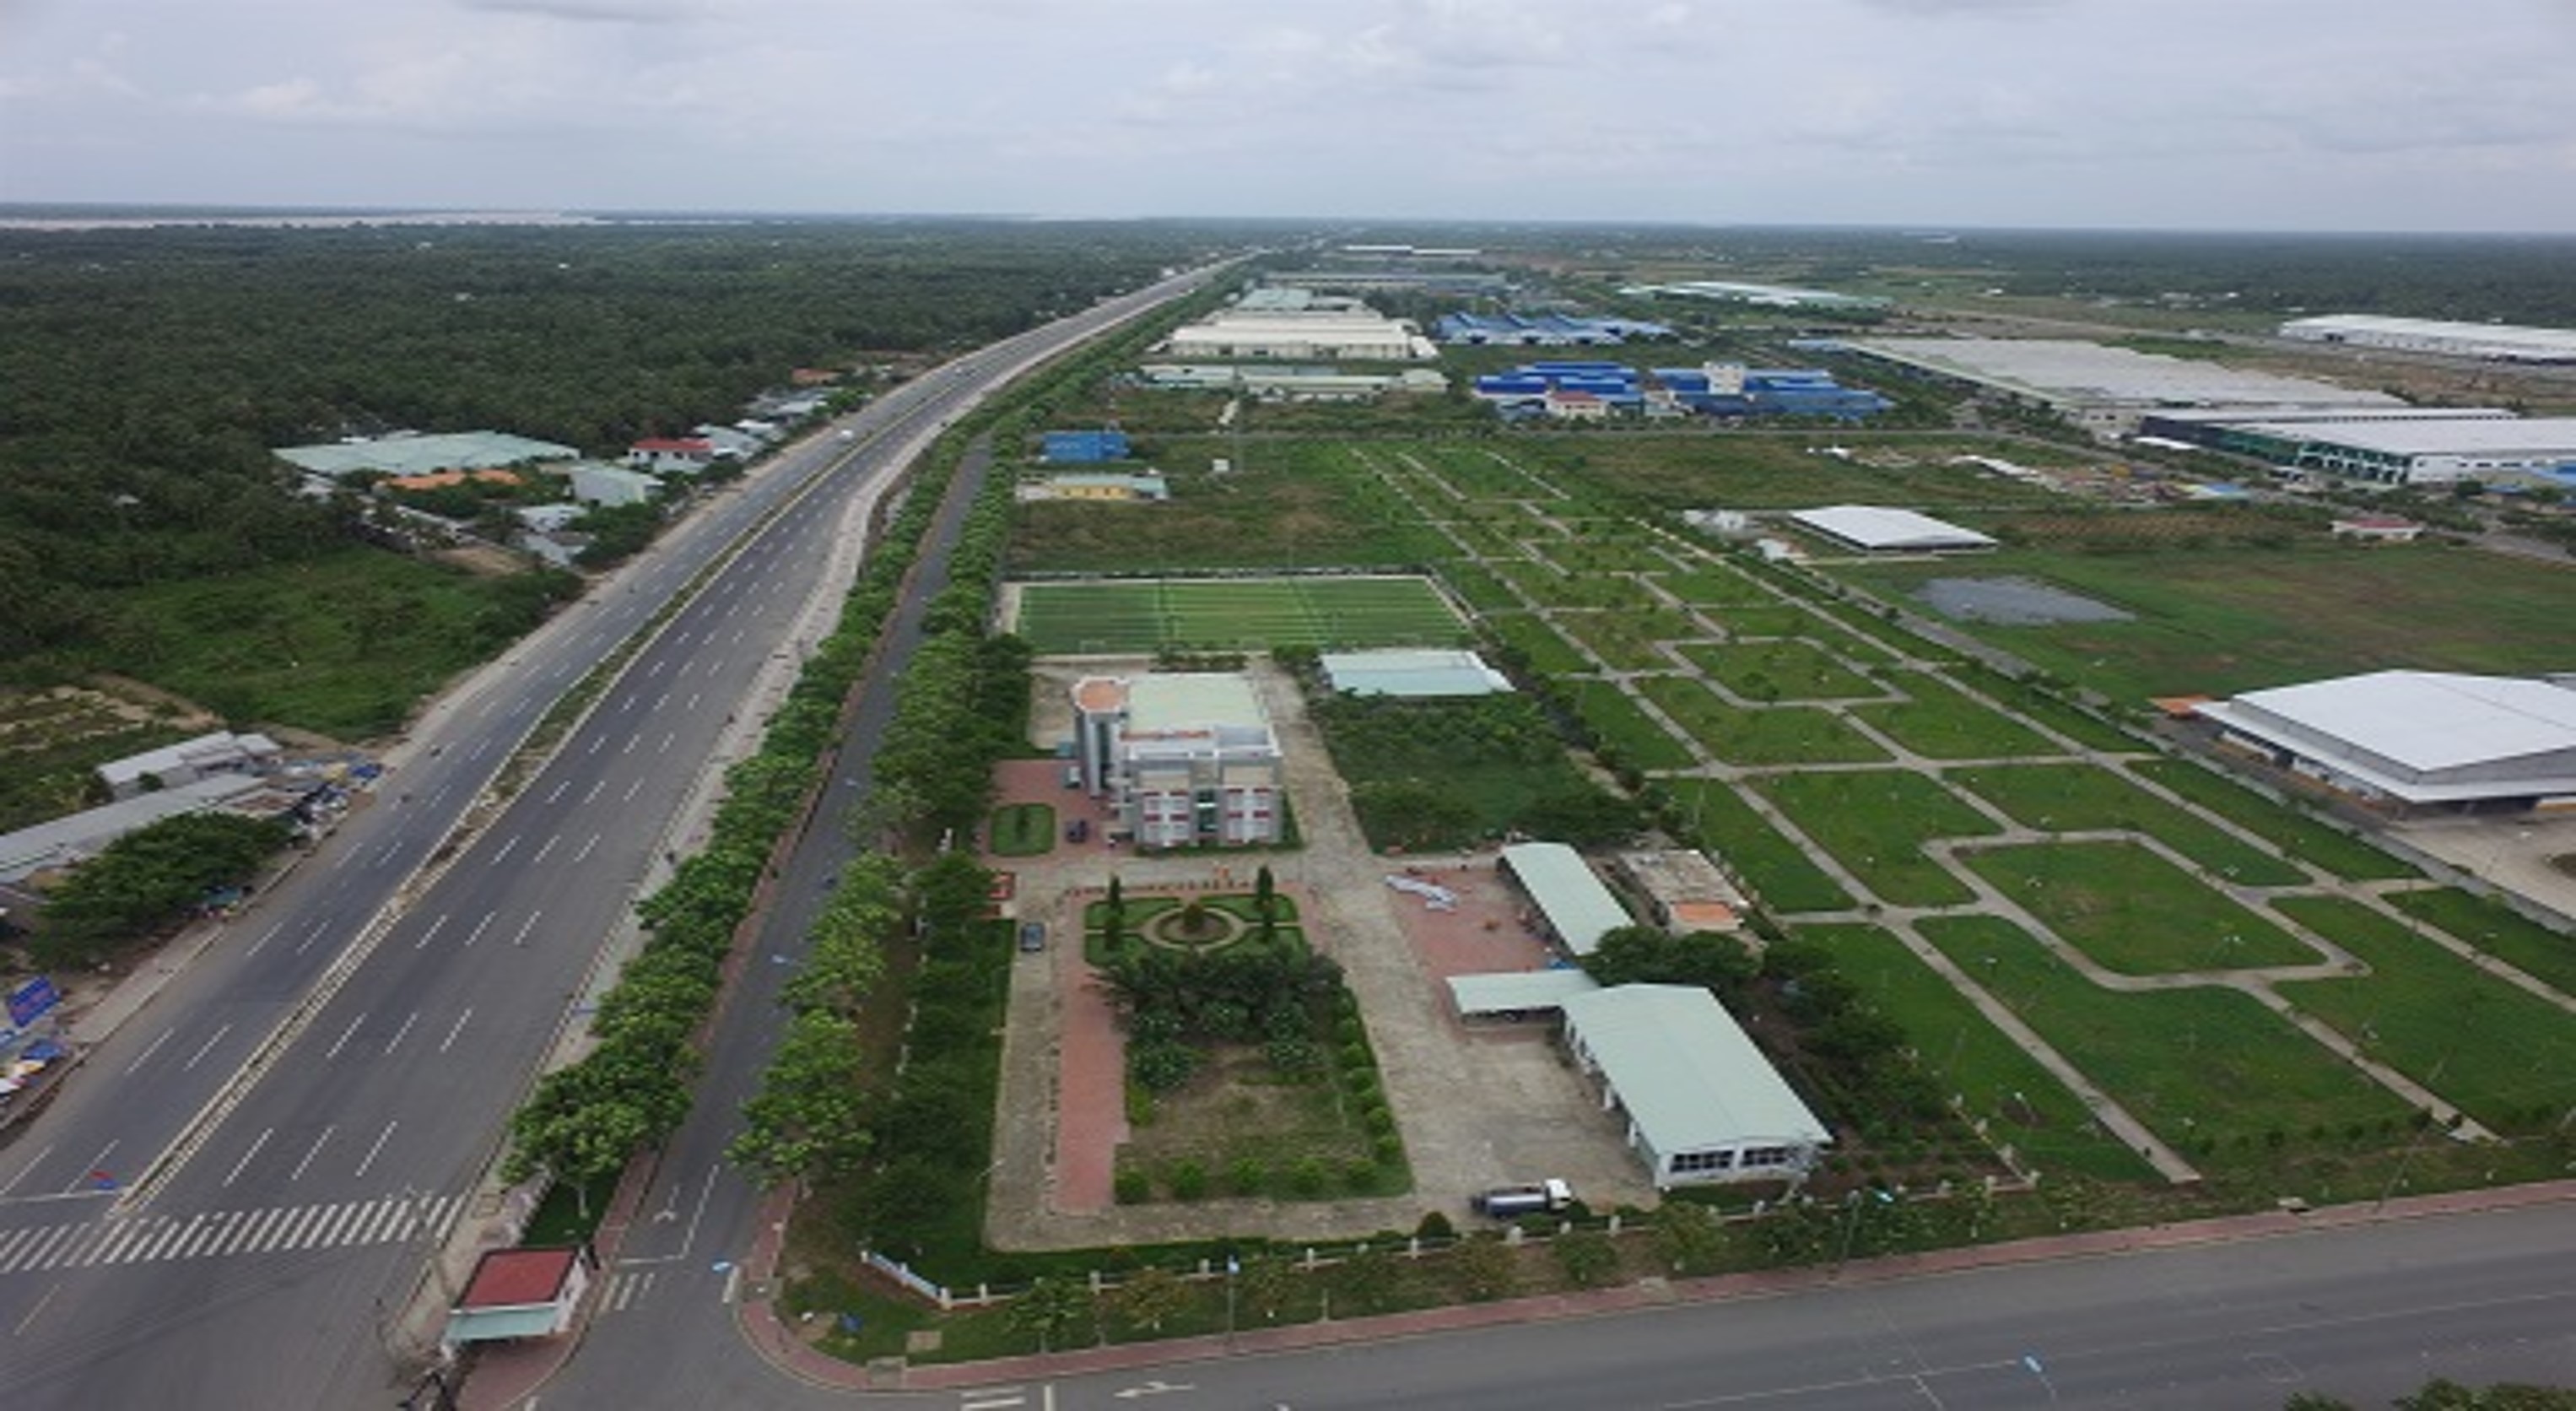 Giao Long 2 Industrial Park